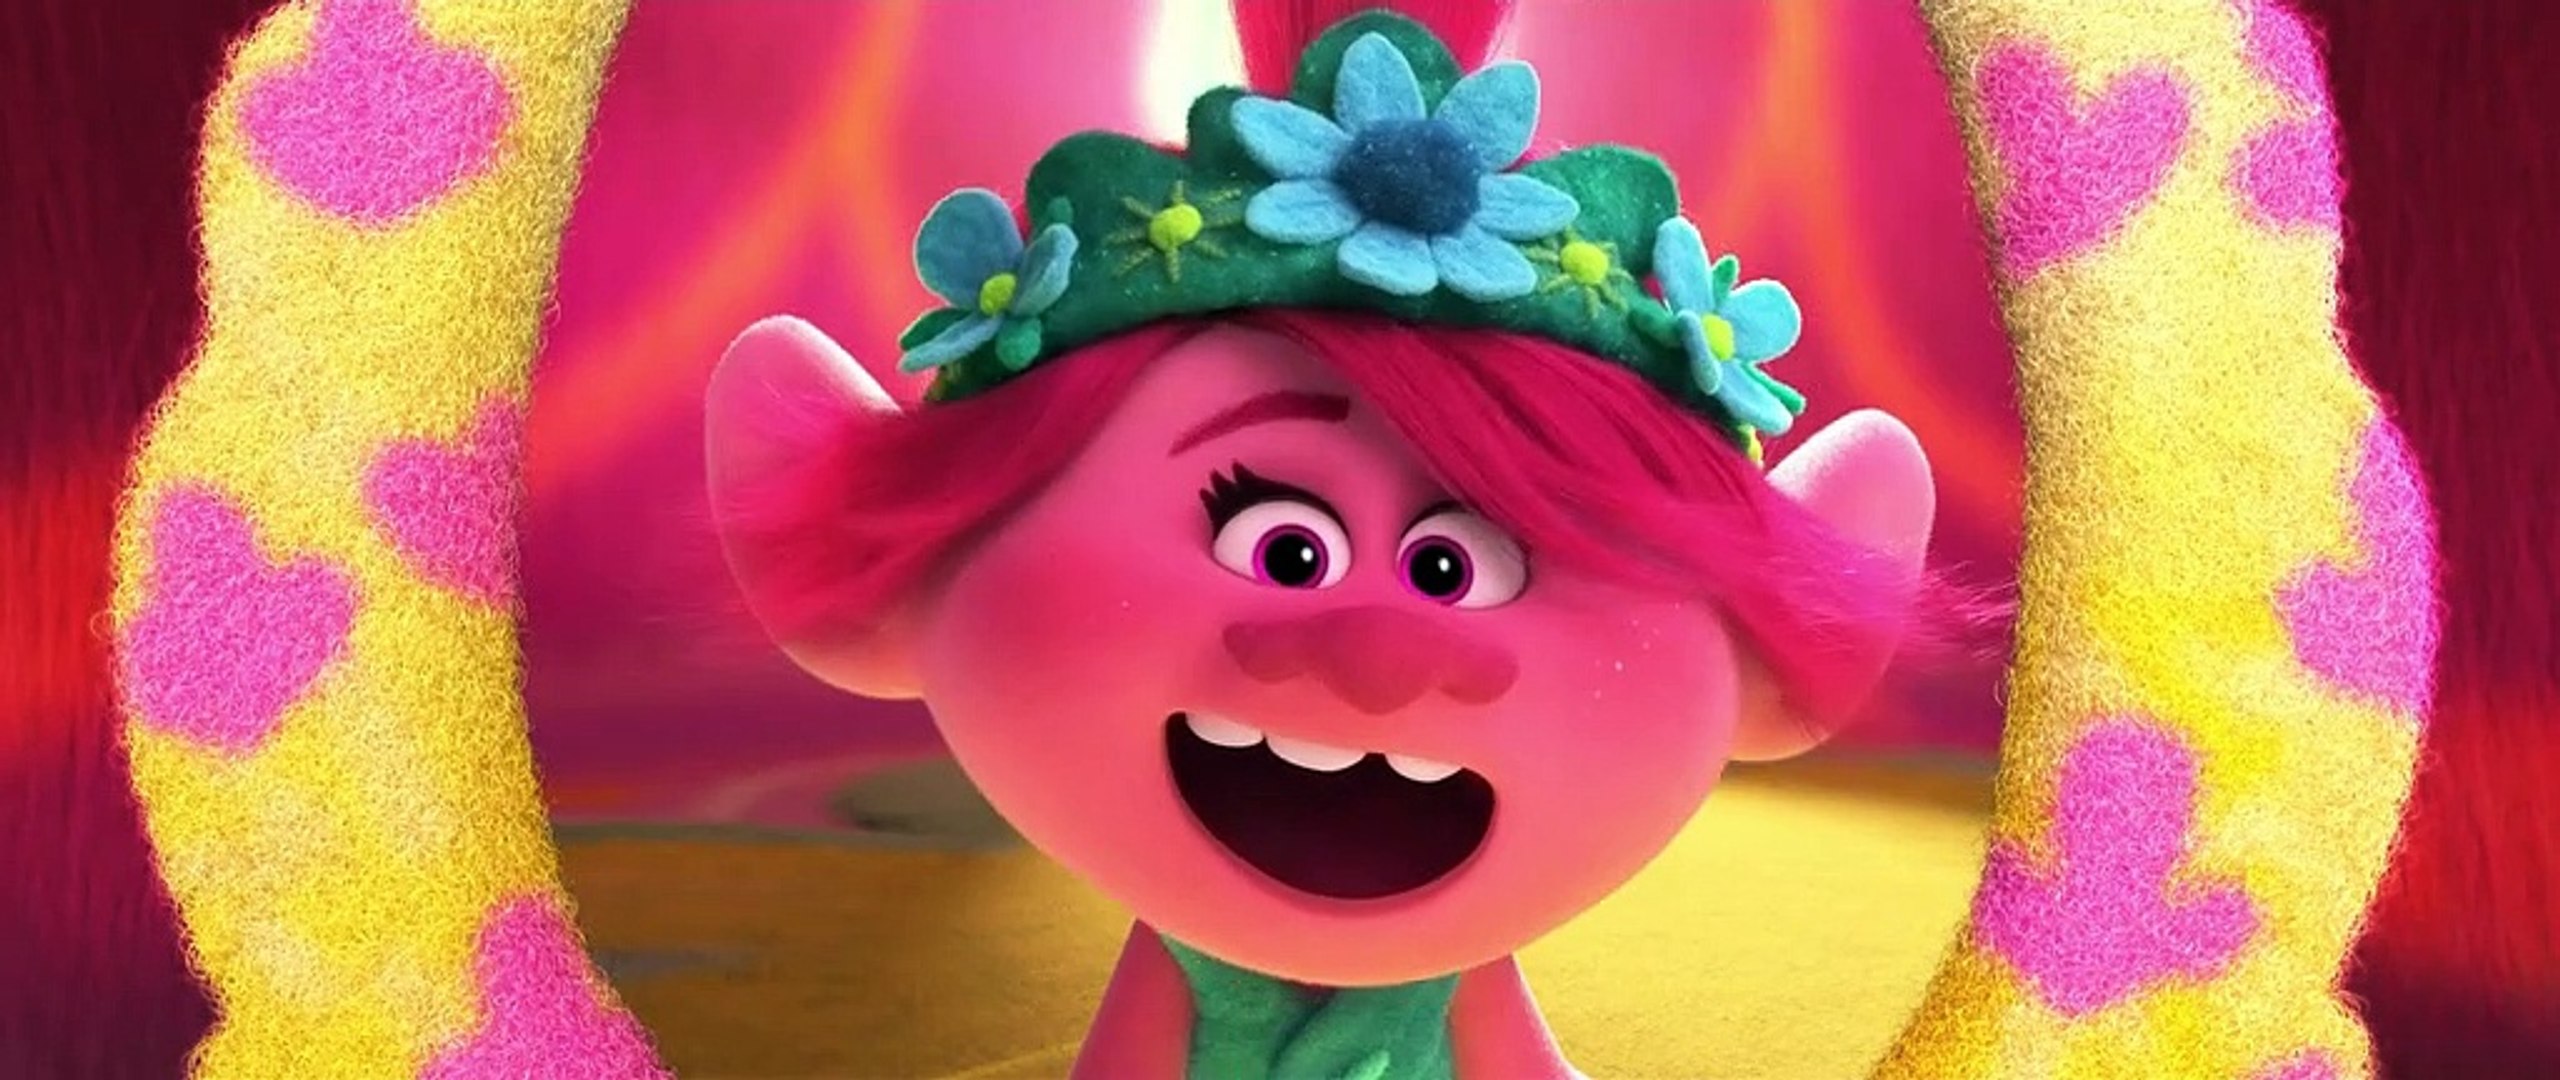 Trolls World Tour - Clip - Trolls Just Want To Have Fun - video Dailymotion